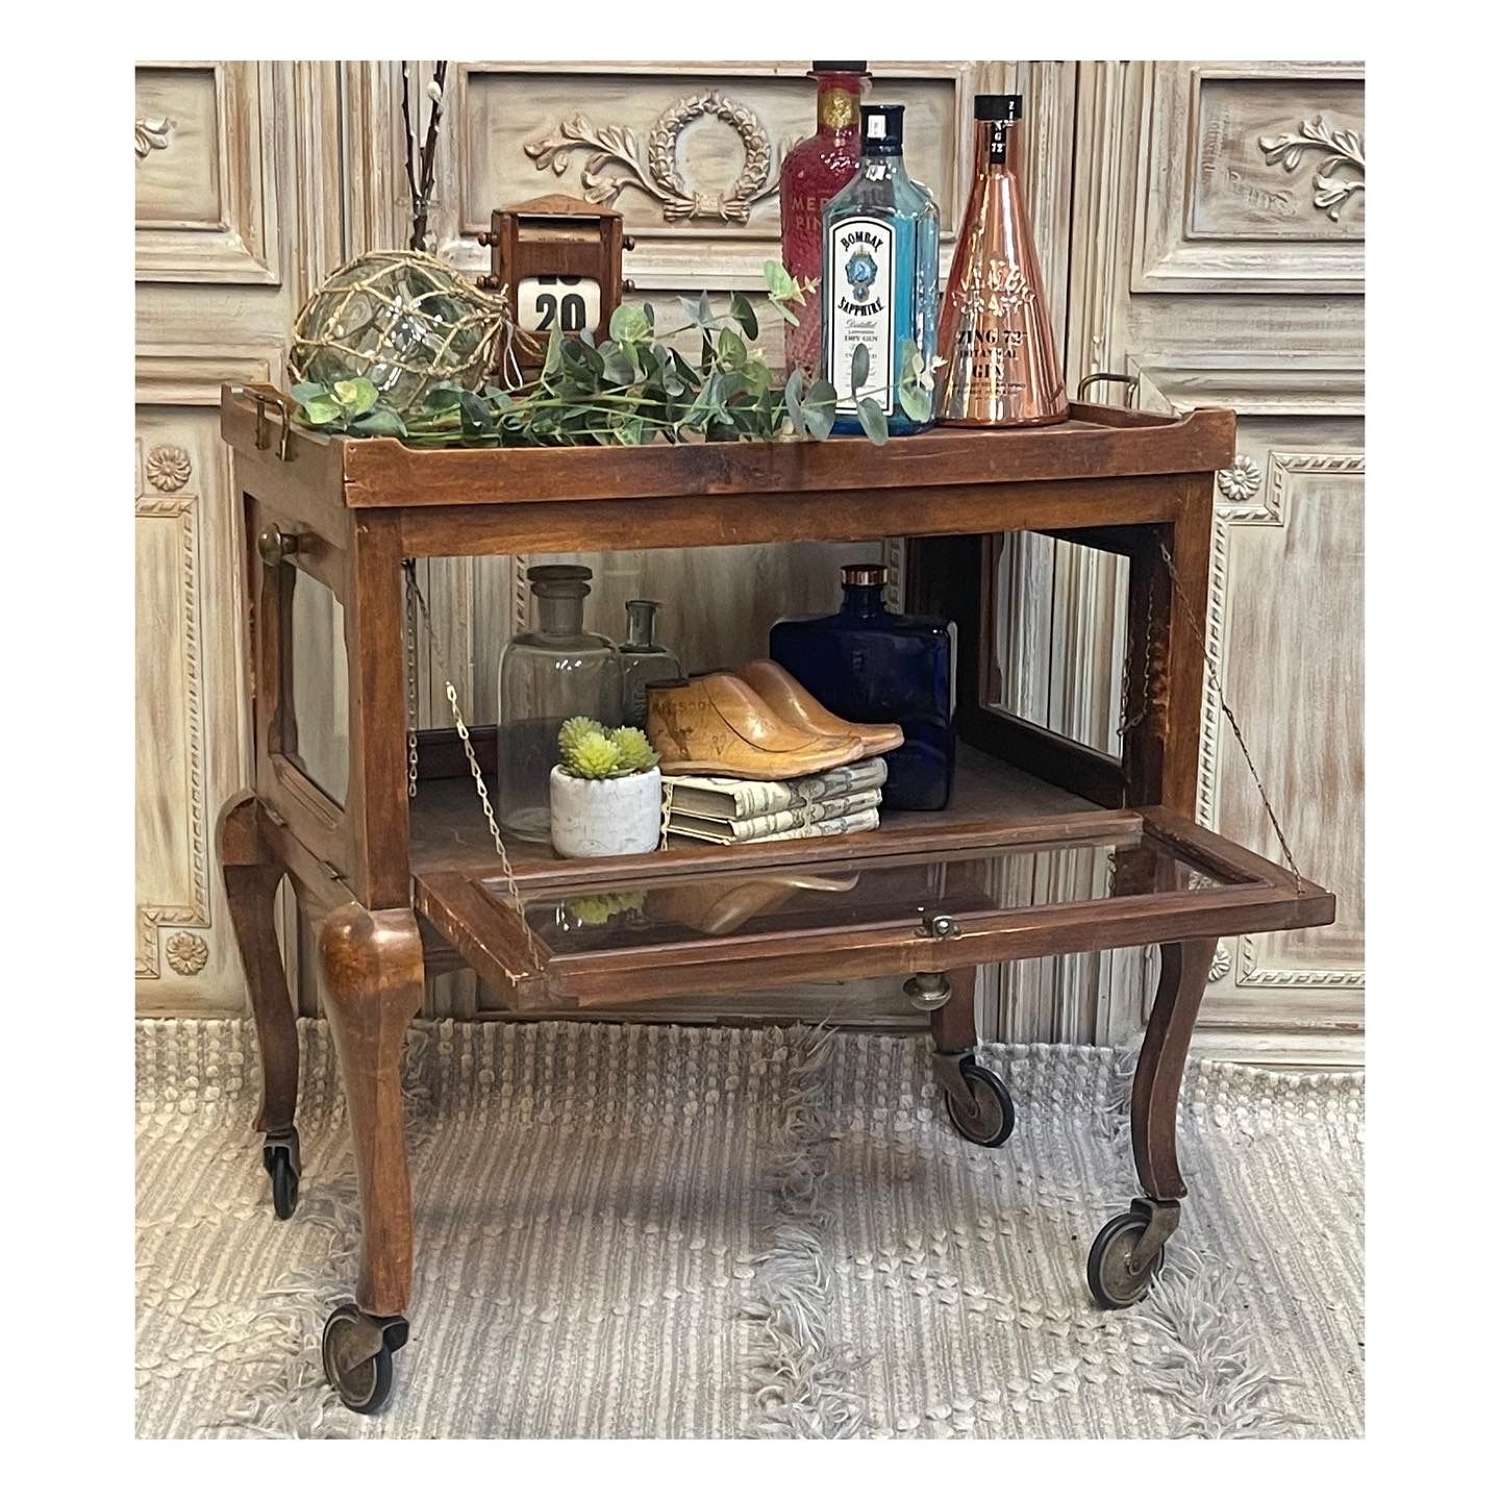 Vintage drinks Cabinet / trolley with tray